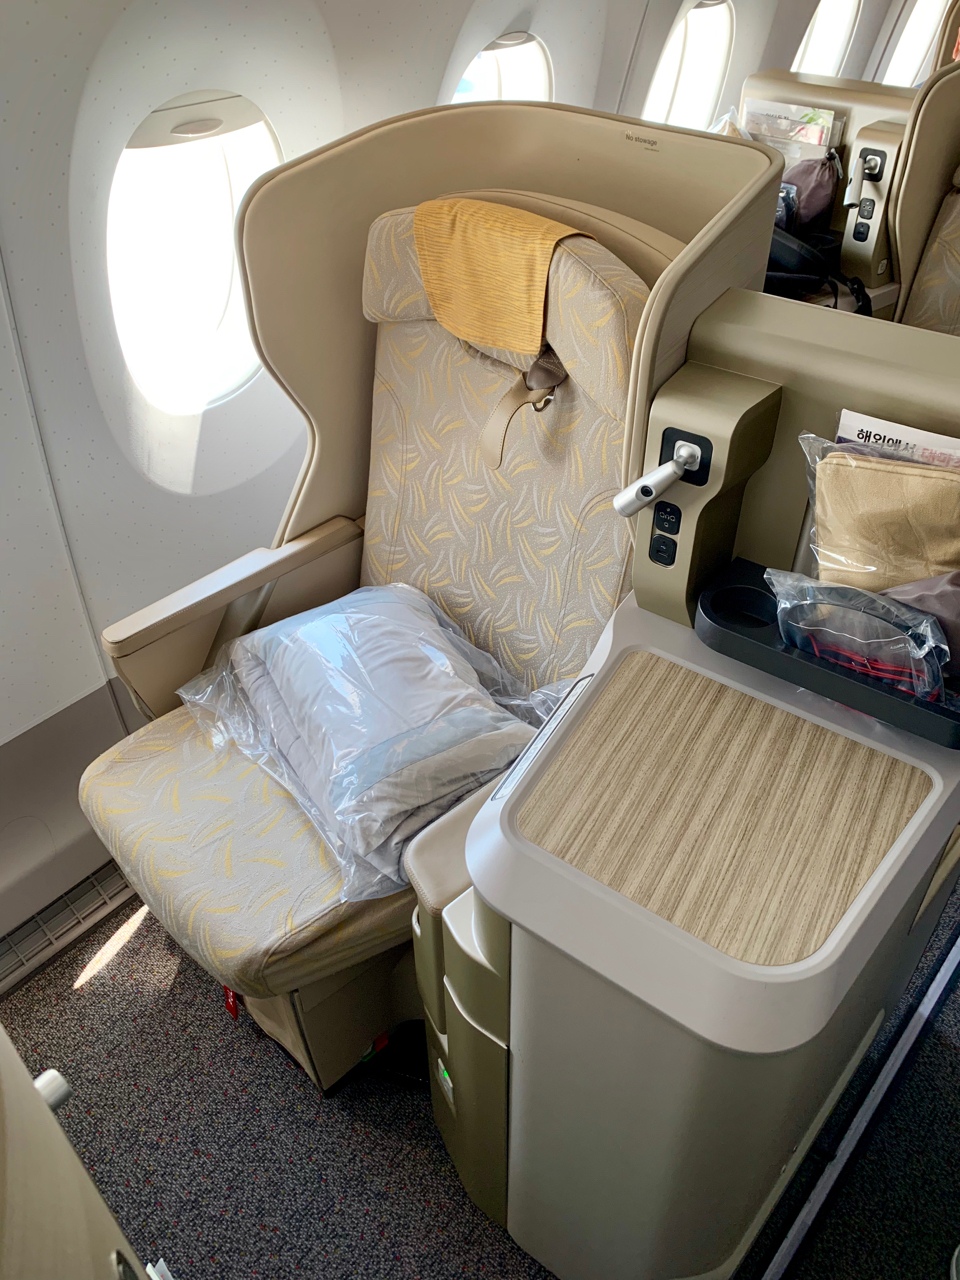 3. Design of Business Class seats may not be to everyone's taste